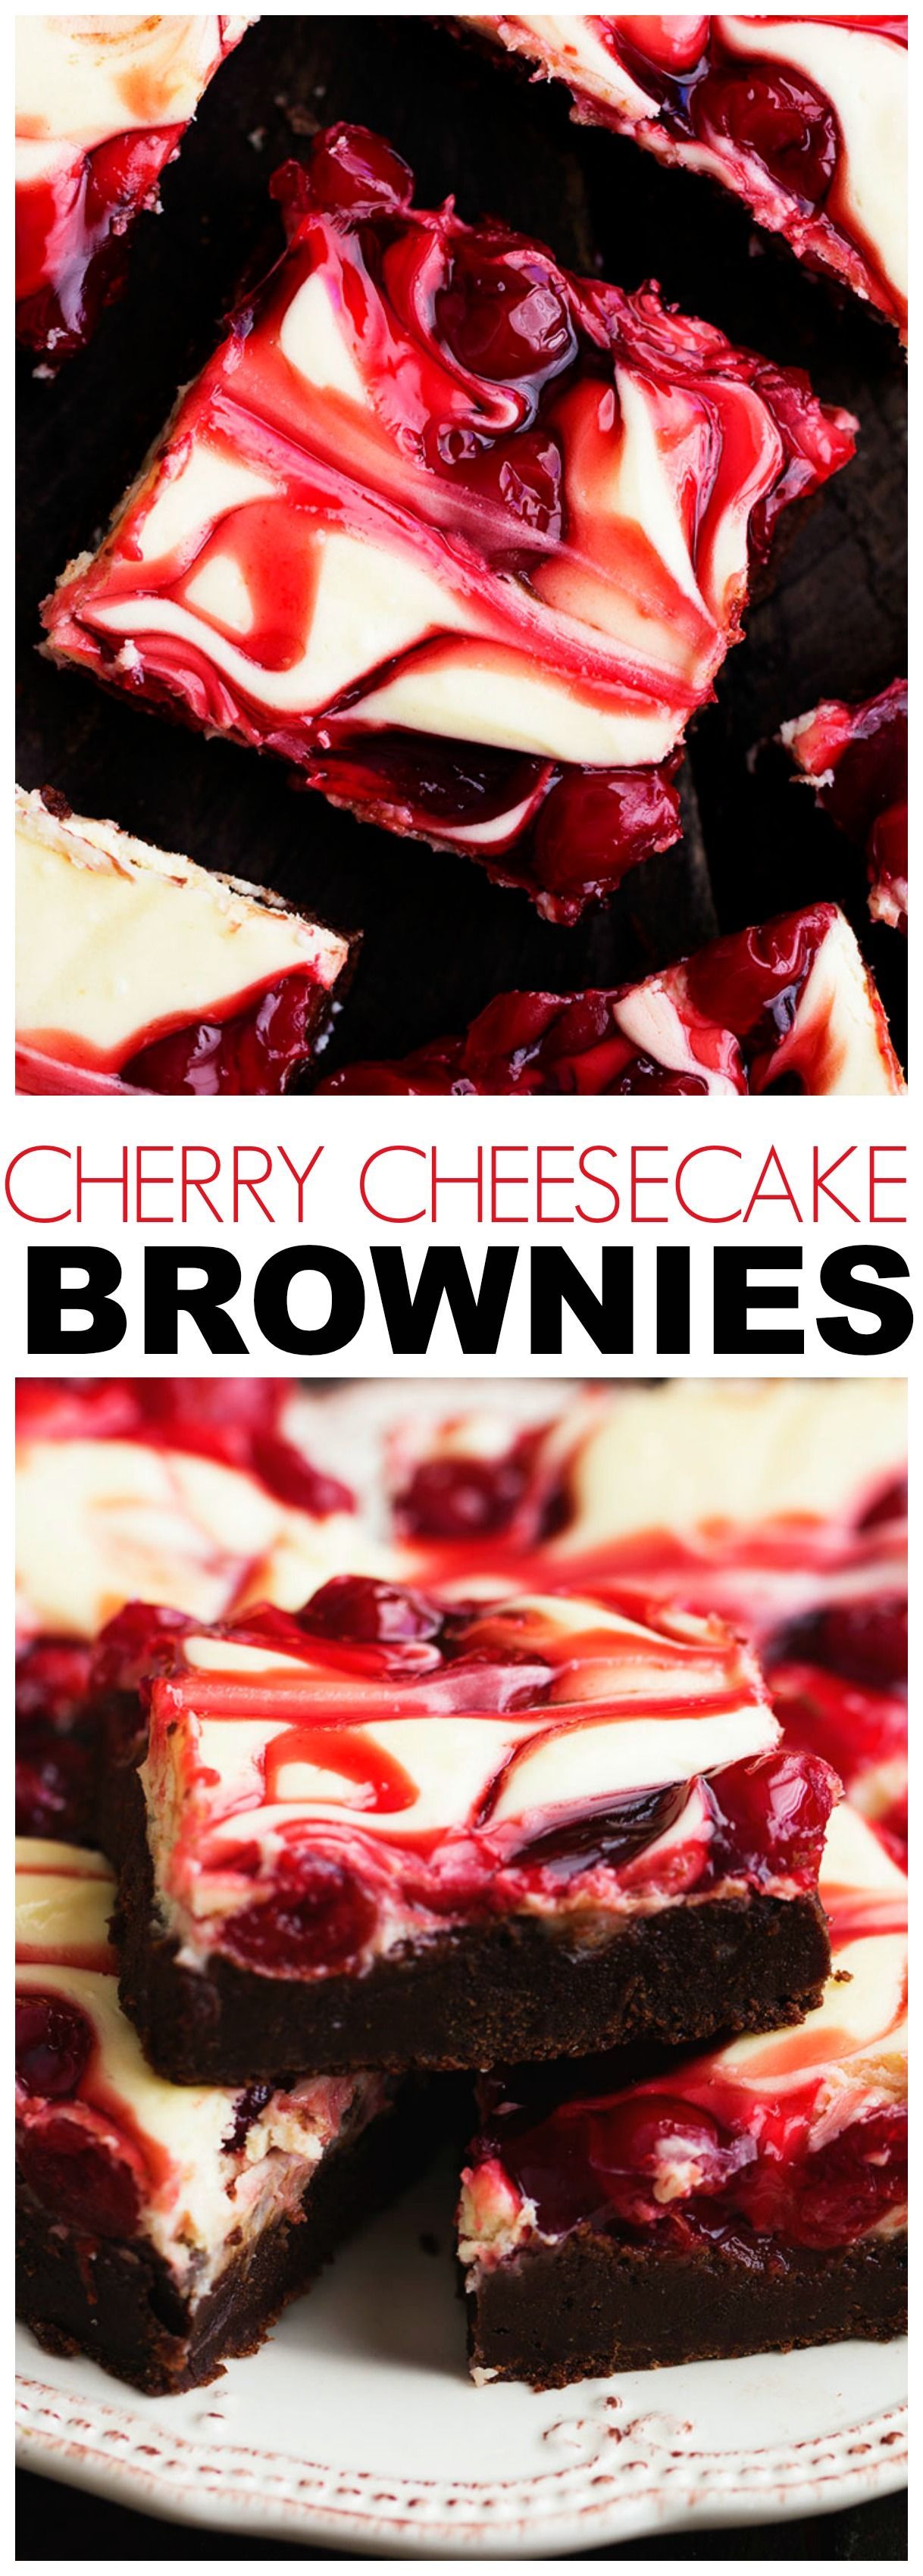 Cherry Cheesecake Brownies are one of the BEST brownies you will make! Three amazing desserts combine in one to bring you a creamy